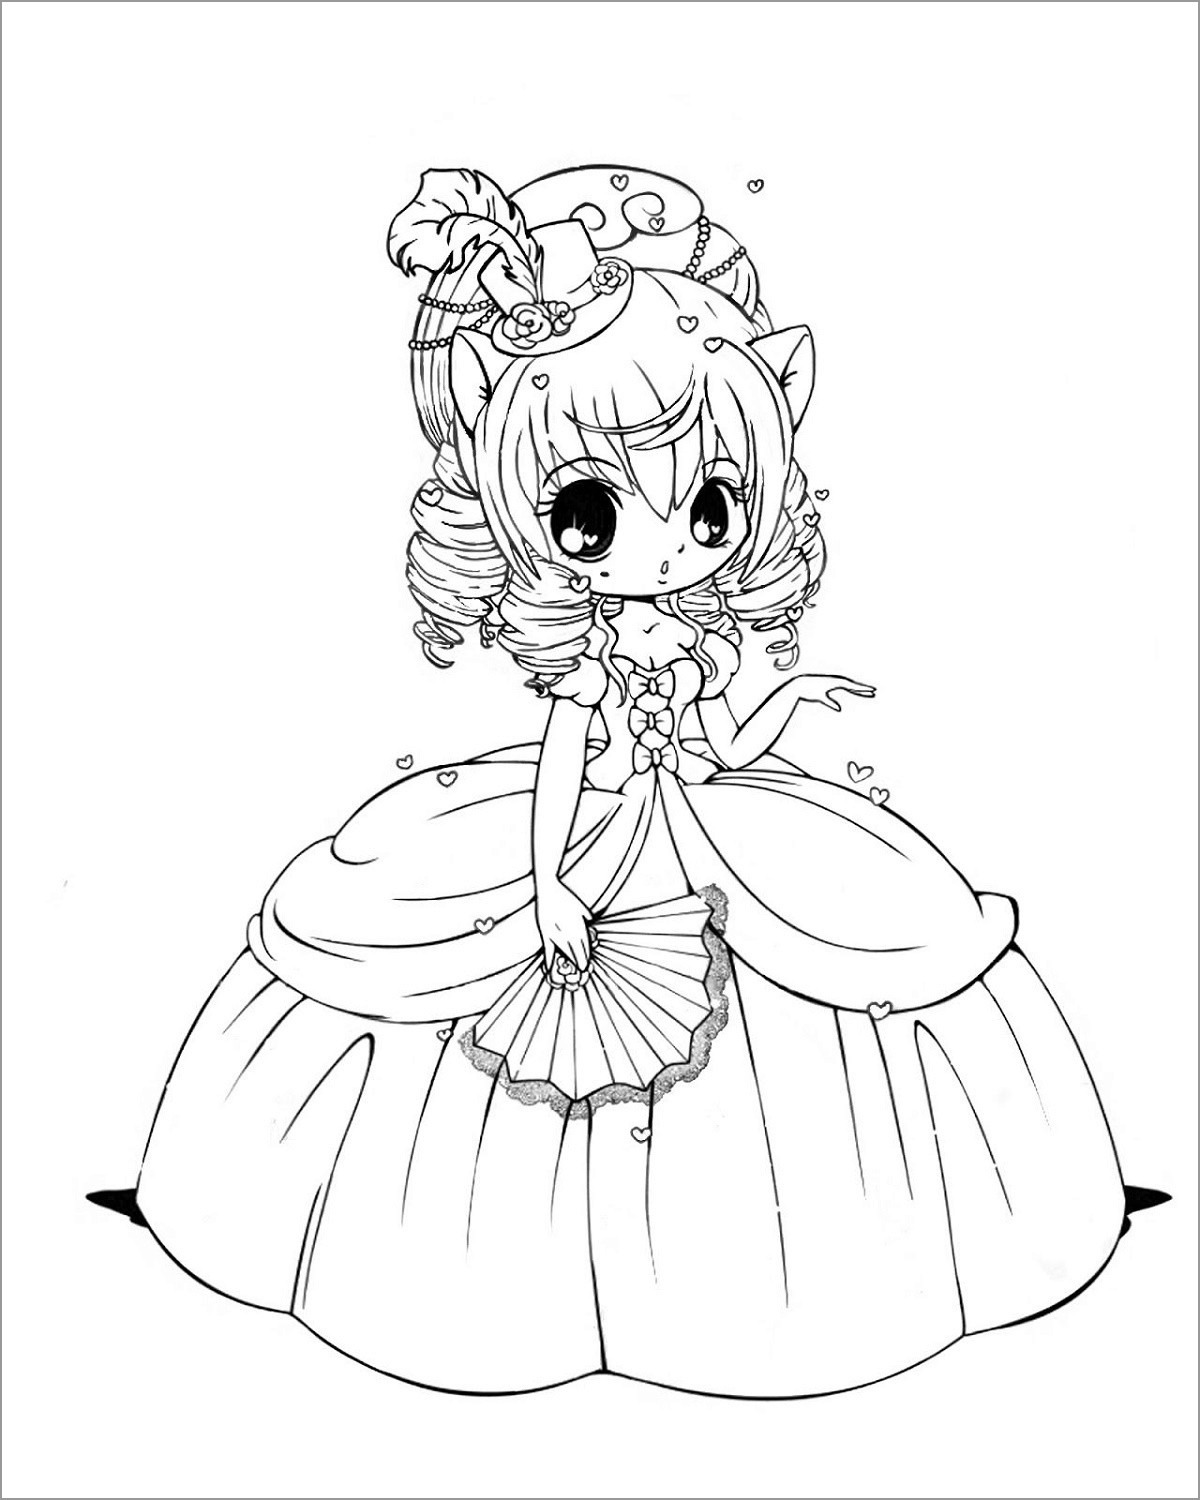 Chibi Coloring Pages   ColoringBay